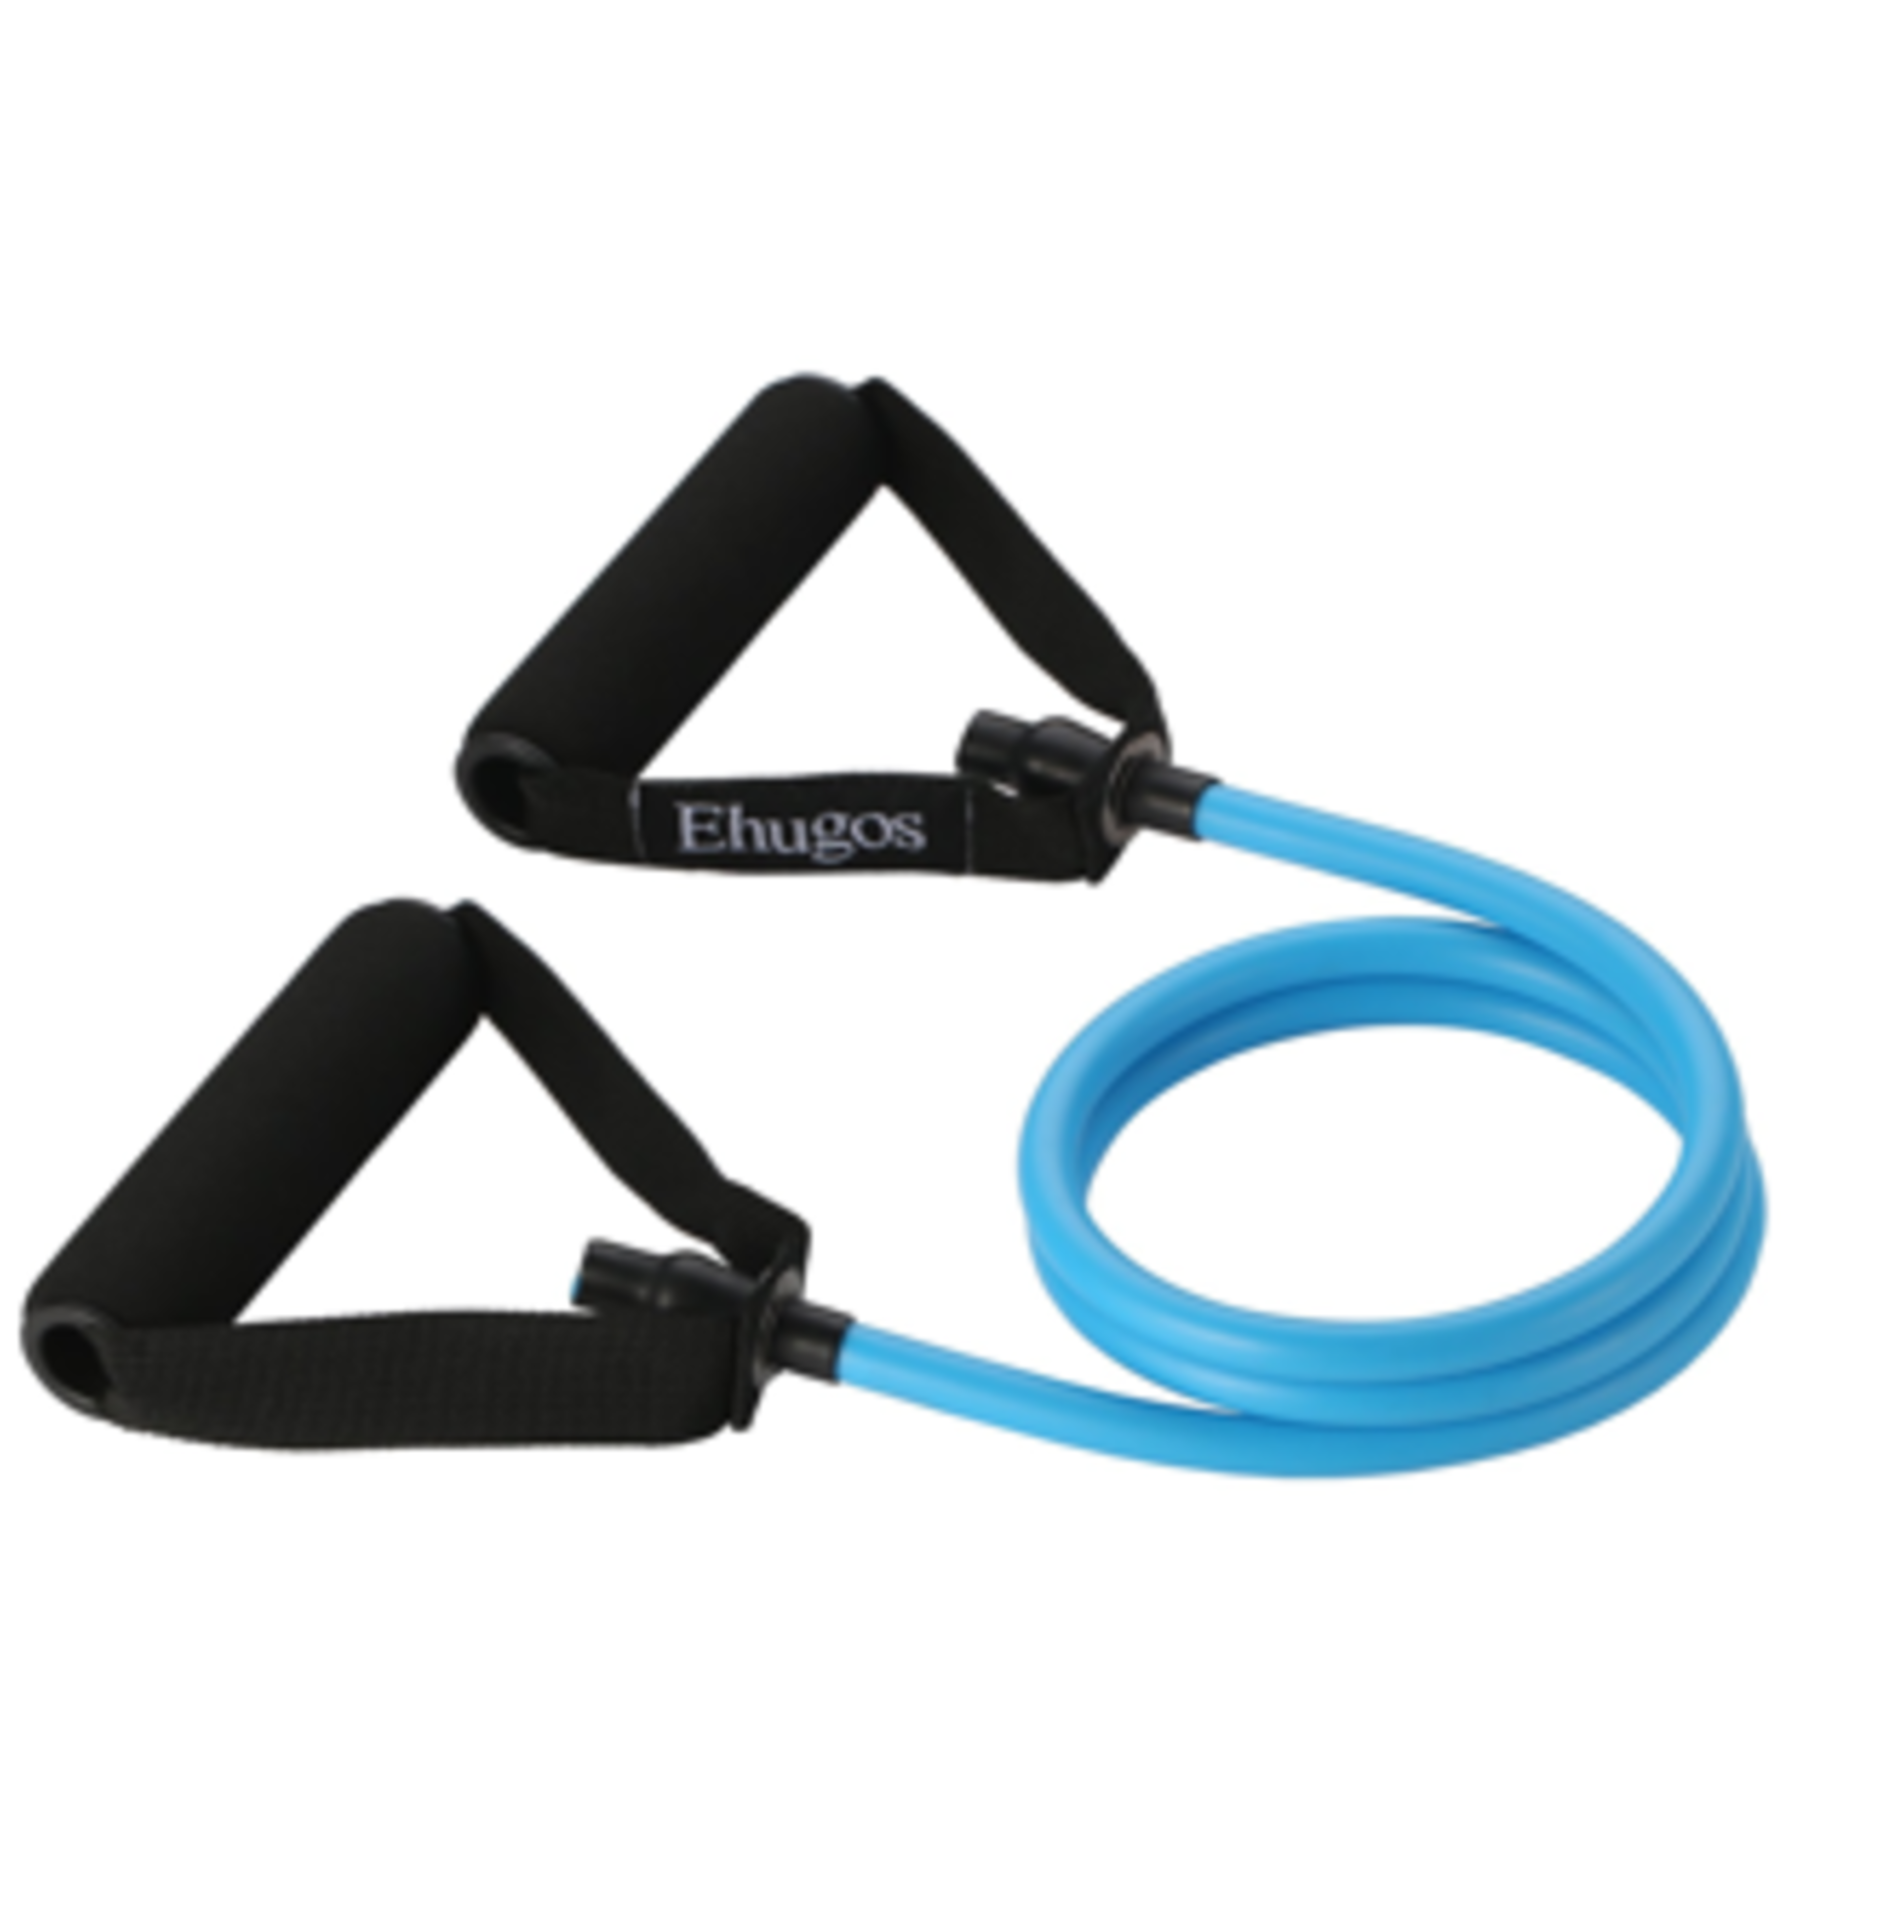 New Boxed Ehugos Resistance Band Resistance